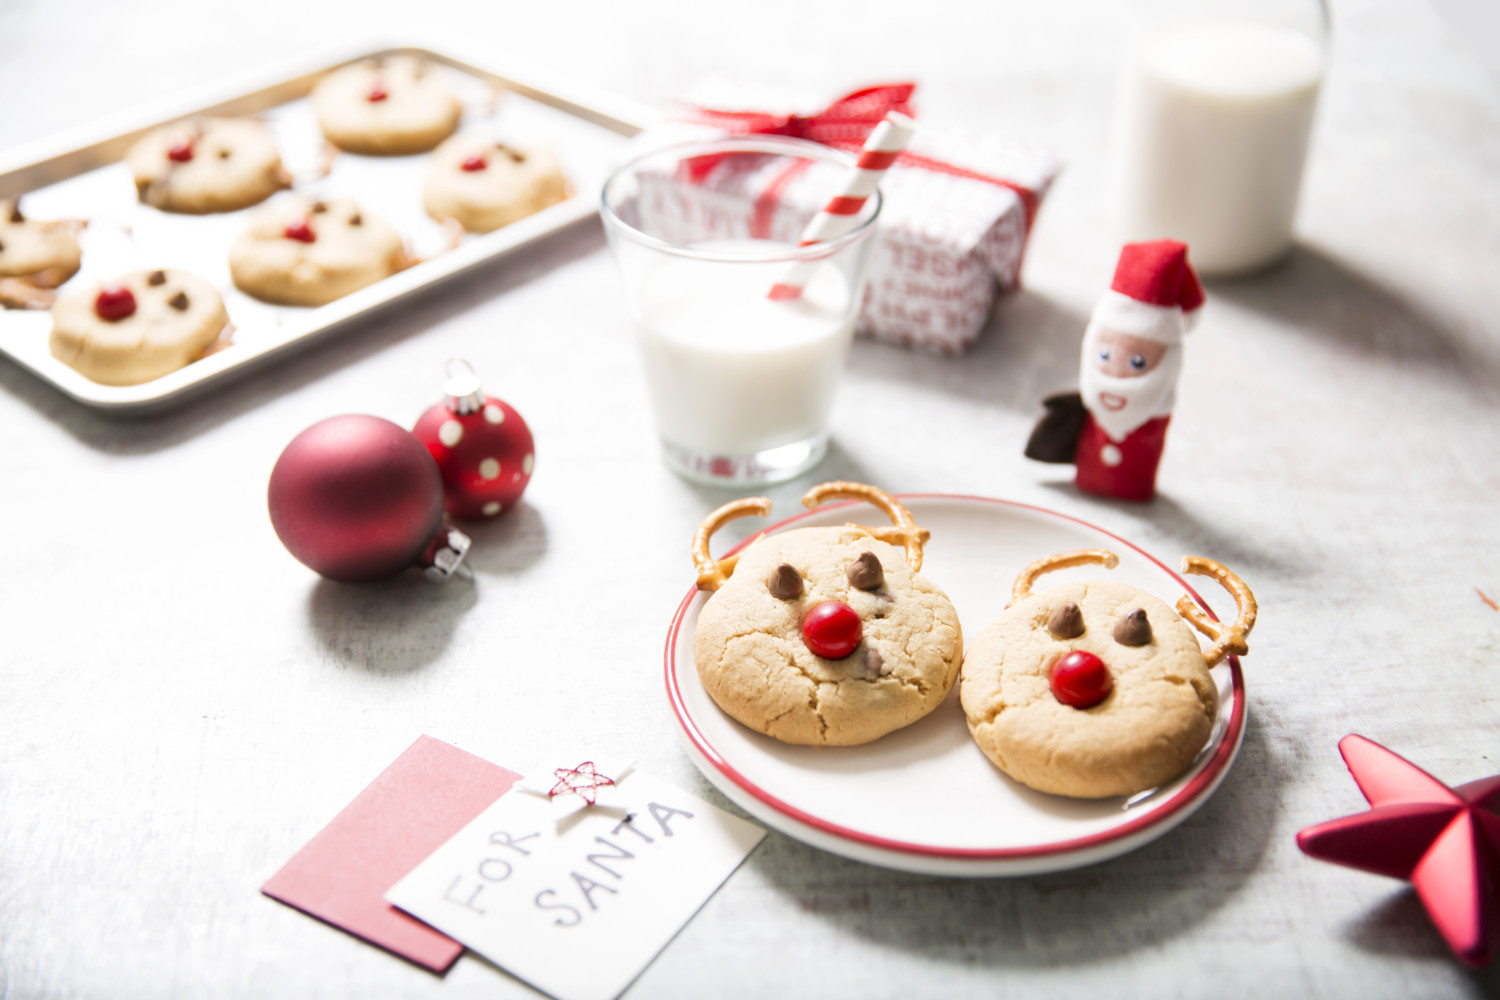 Rudolph reindeer holiday cookie recipe using pretzels for antlers